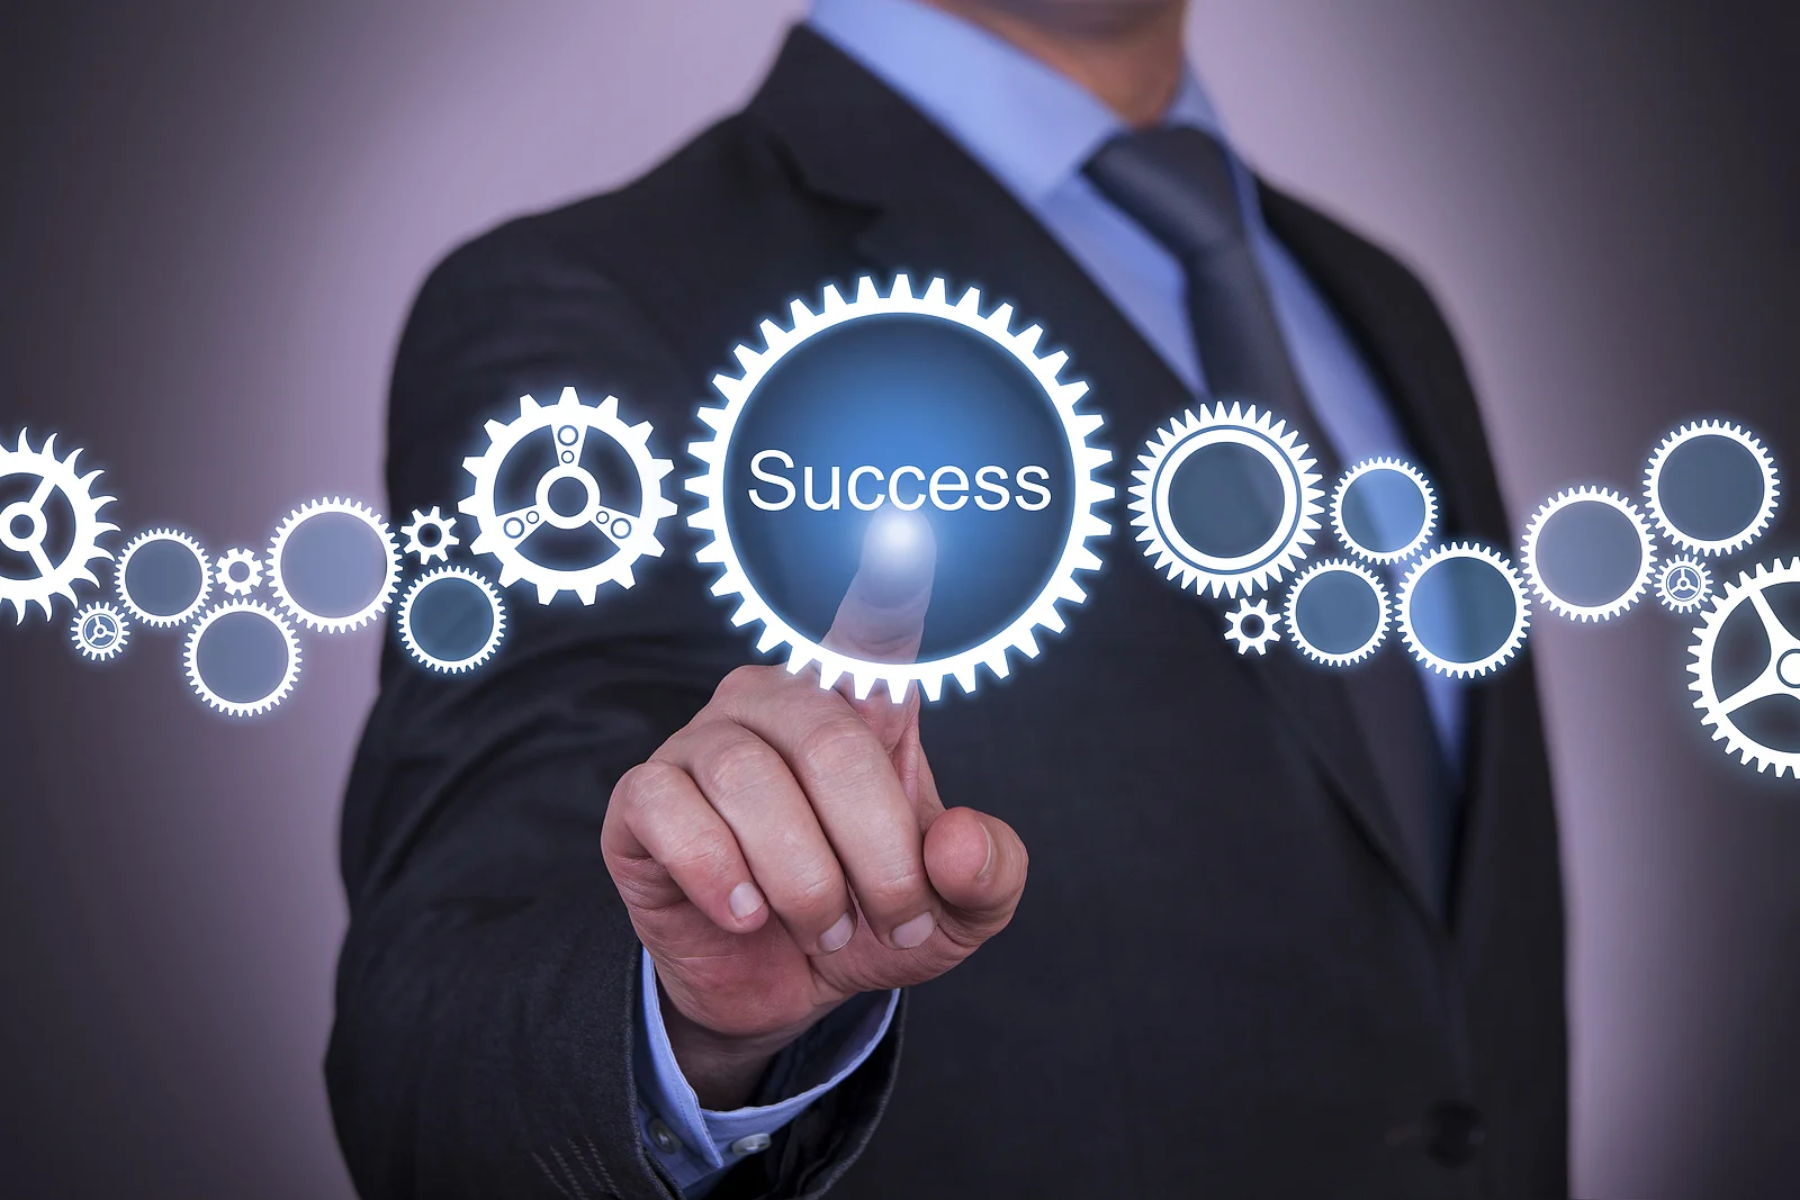 A businessman pointing to the setting logos, which have the word "Success" in the center